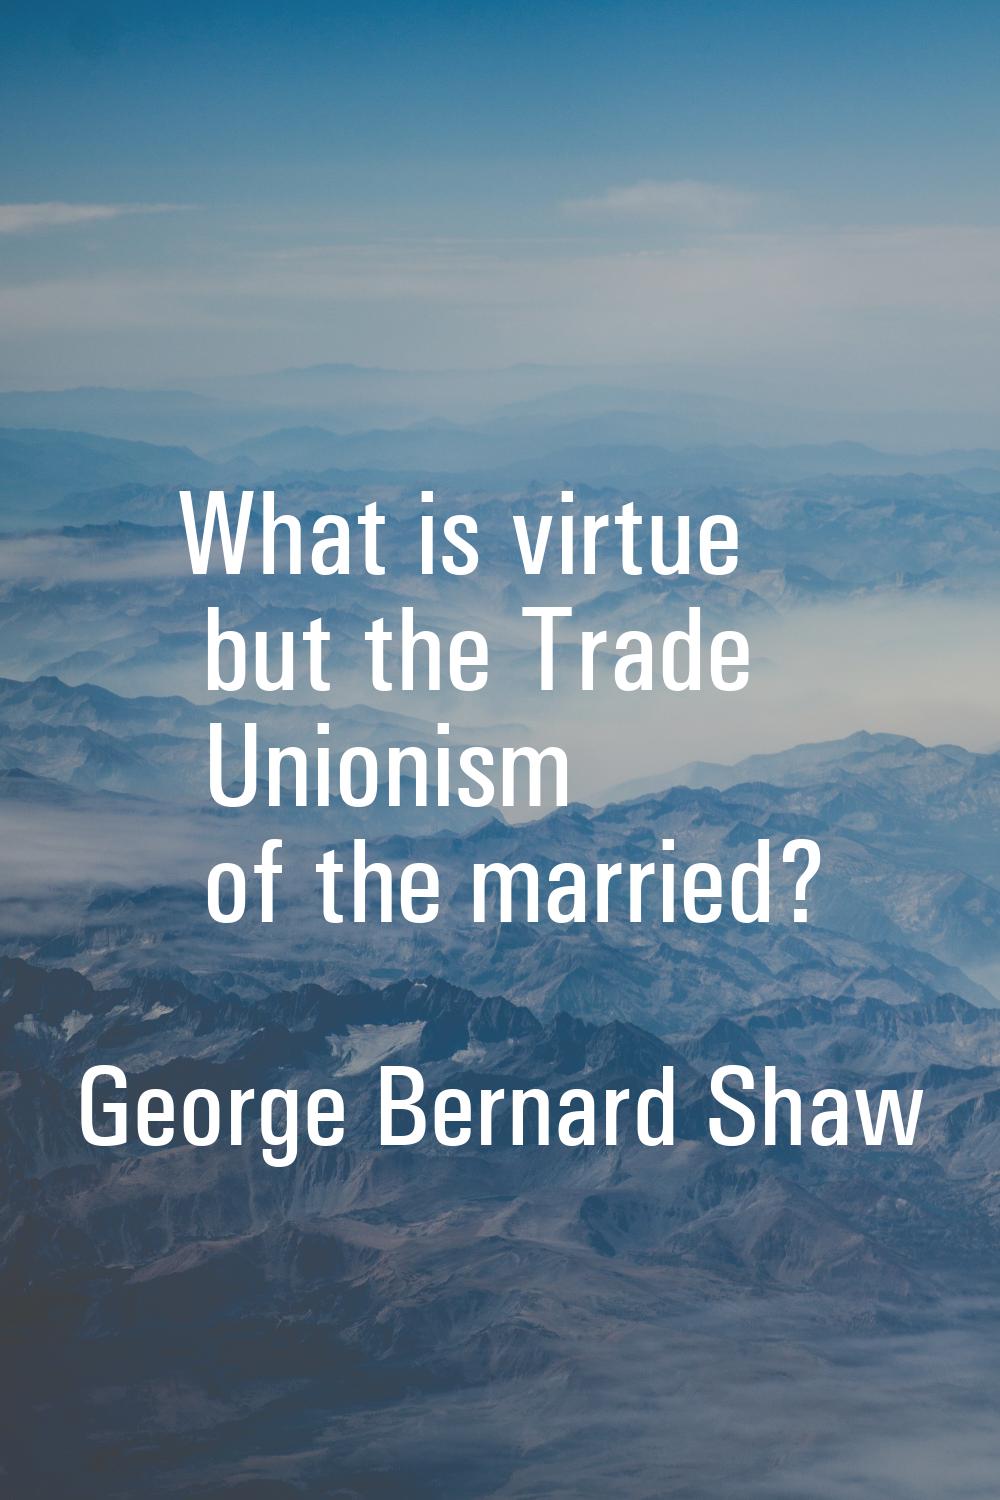 What is virtue but the Trade Unionism of the married?